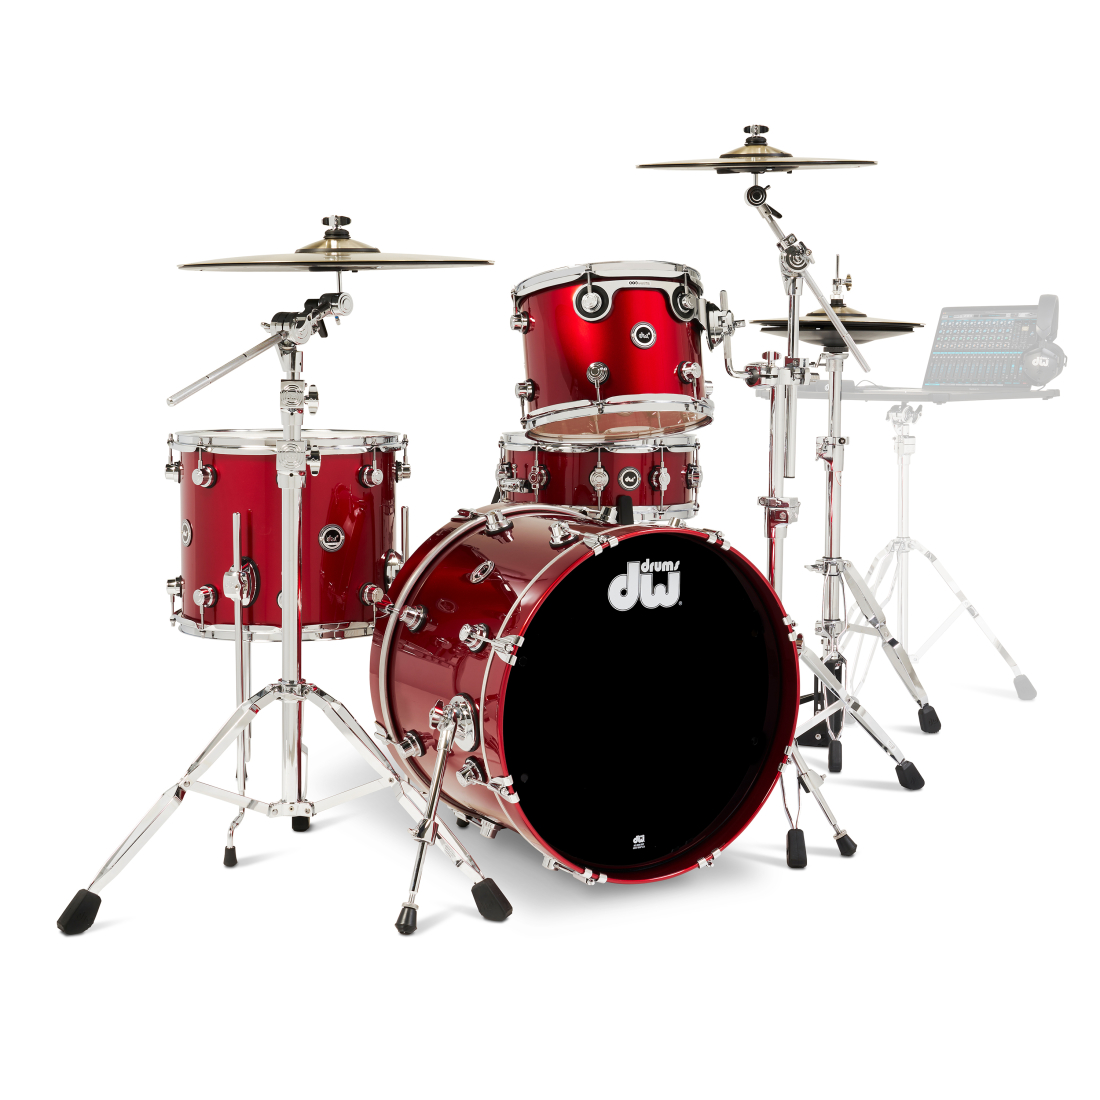 DWe 4-Piece Drumset with Cymbals and Hardware - Black Cherry Metallic